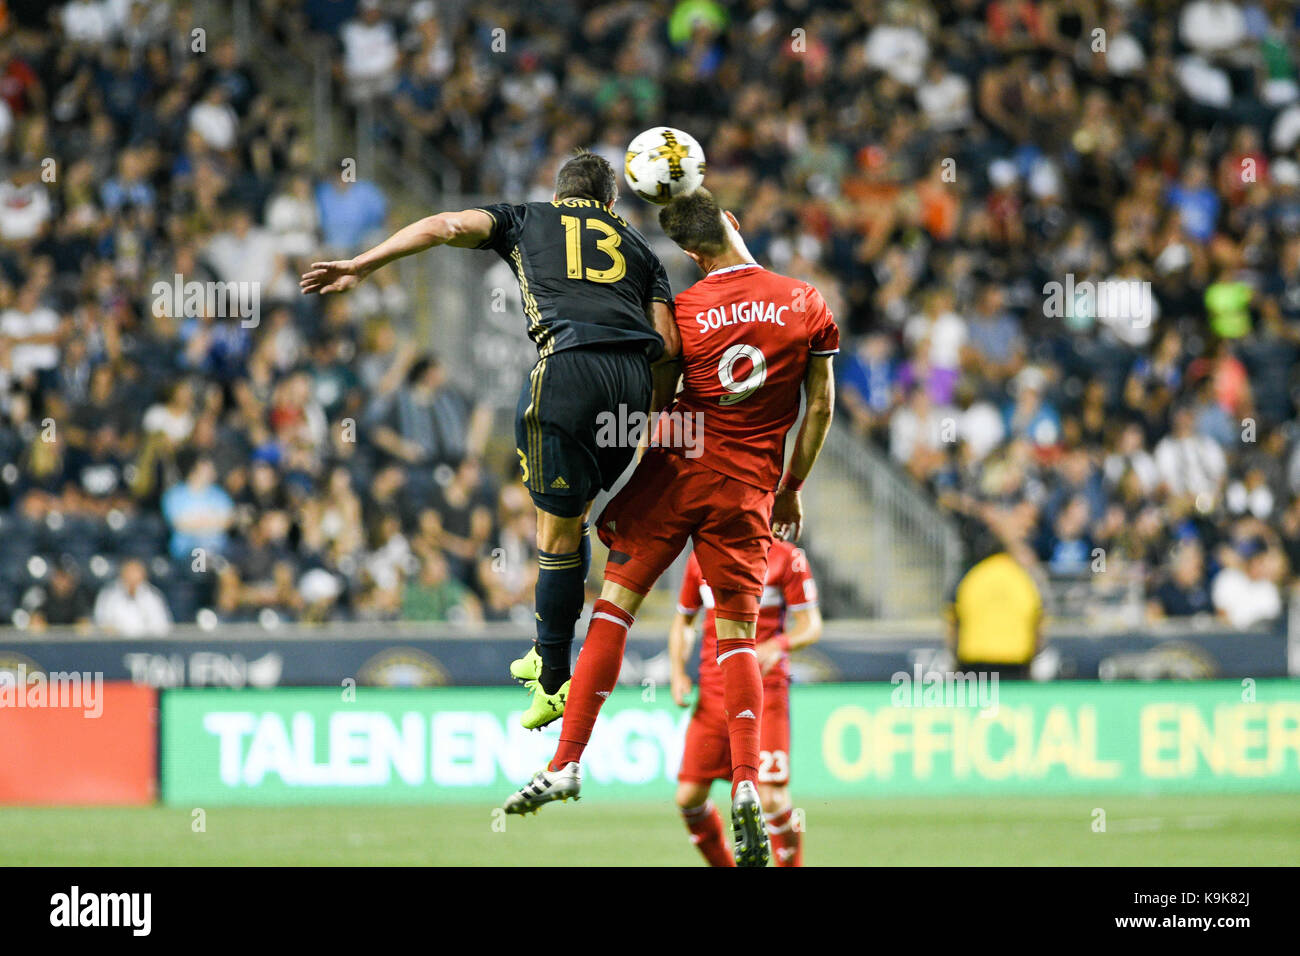 Chester, Pennsylvania, USA. 23rd Sep, 2017. Philadelphia Union's CHRIS PONTIUS (13) in action against LUIS SOLIGNAC, (9) during the match against the Chicago Fire at Talen Energy Stadium in Chester Pennsylvania Credit: Ricky Fitchett/ZUMA Wire/Alamy Live News Stock Photo